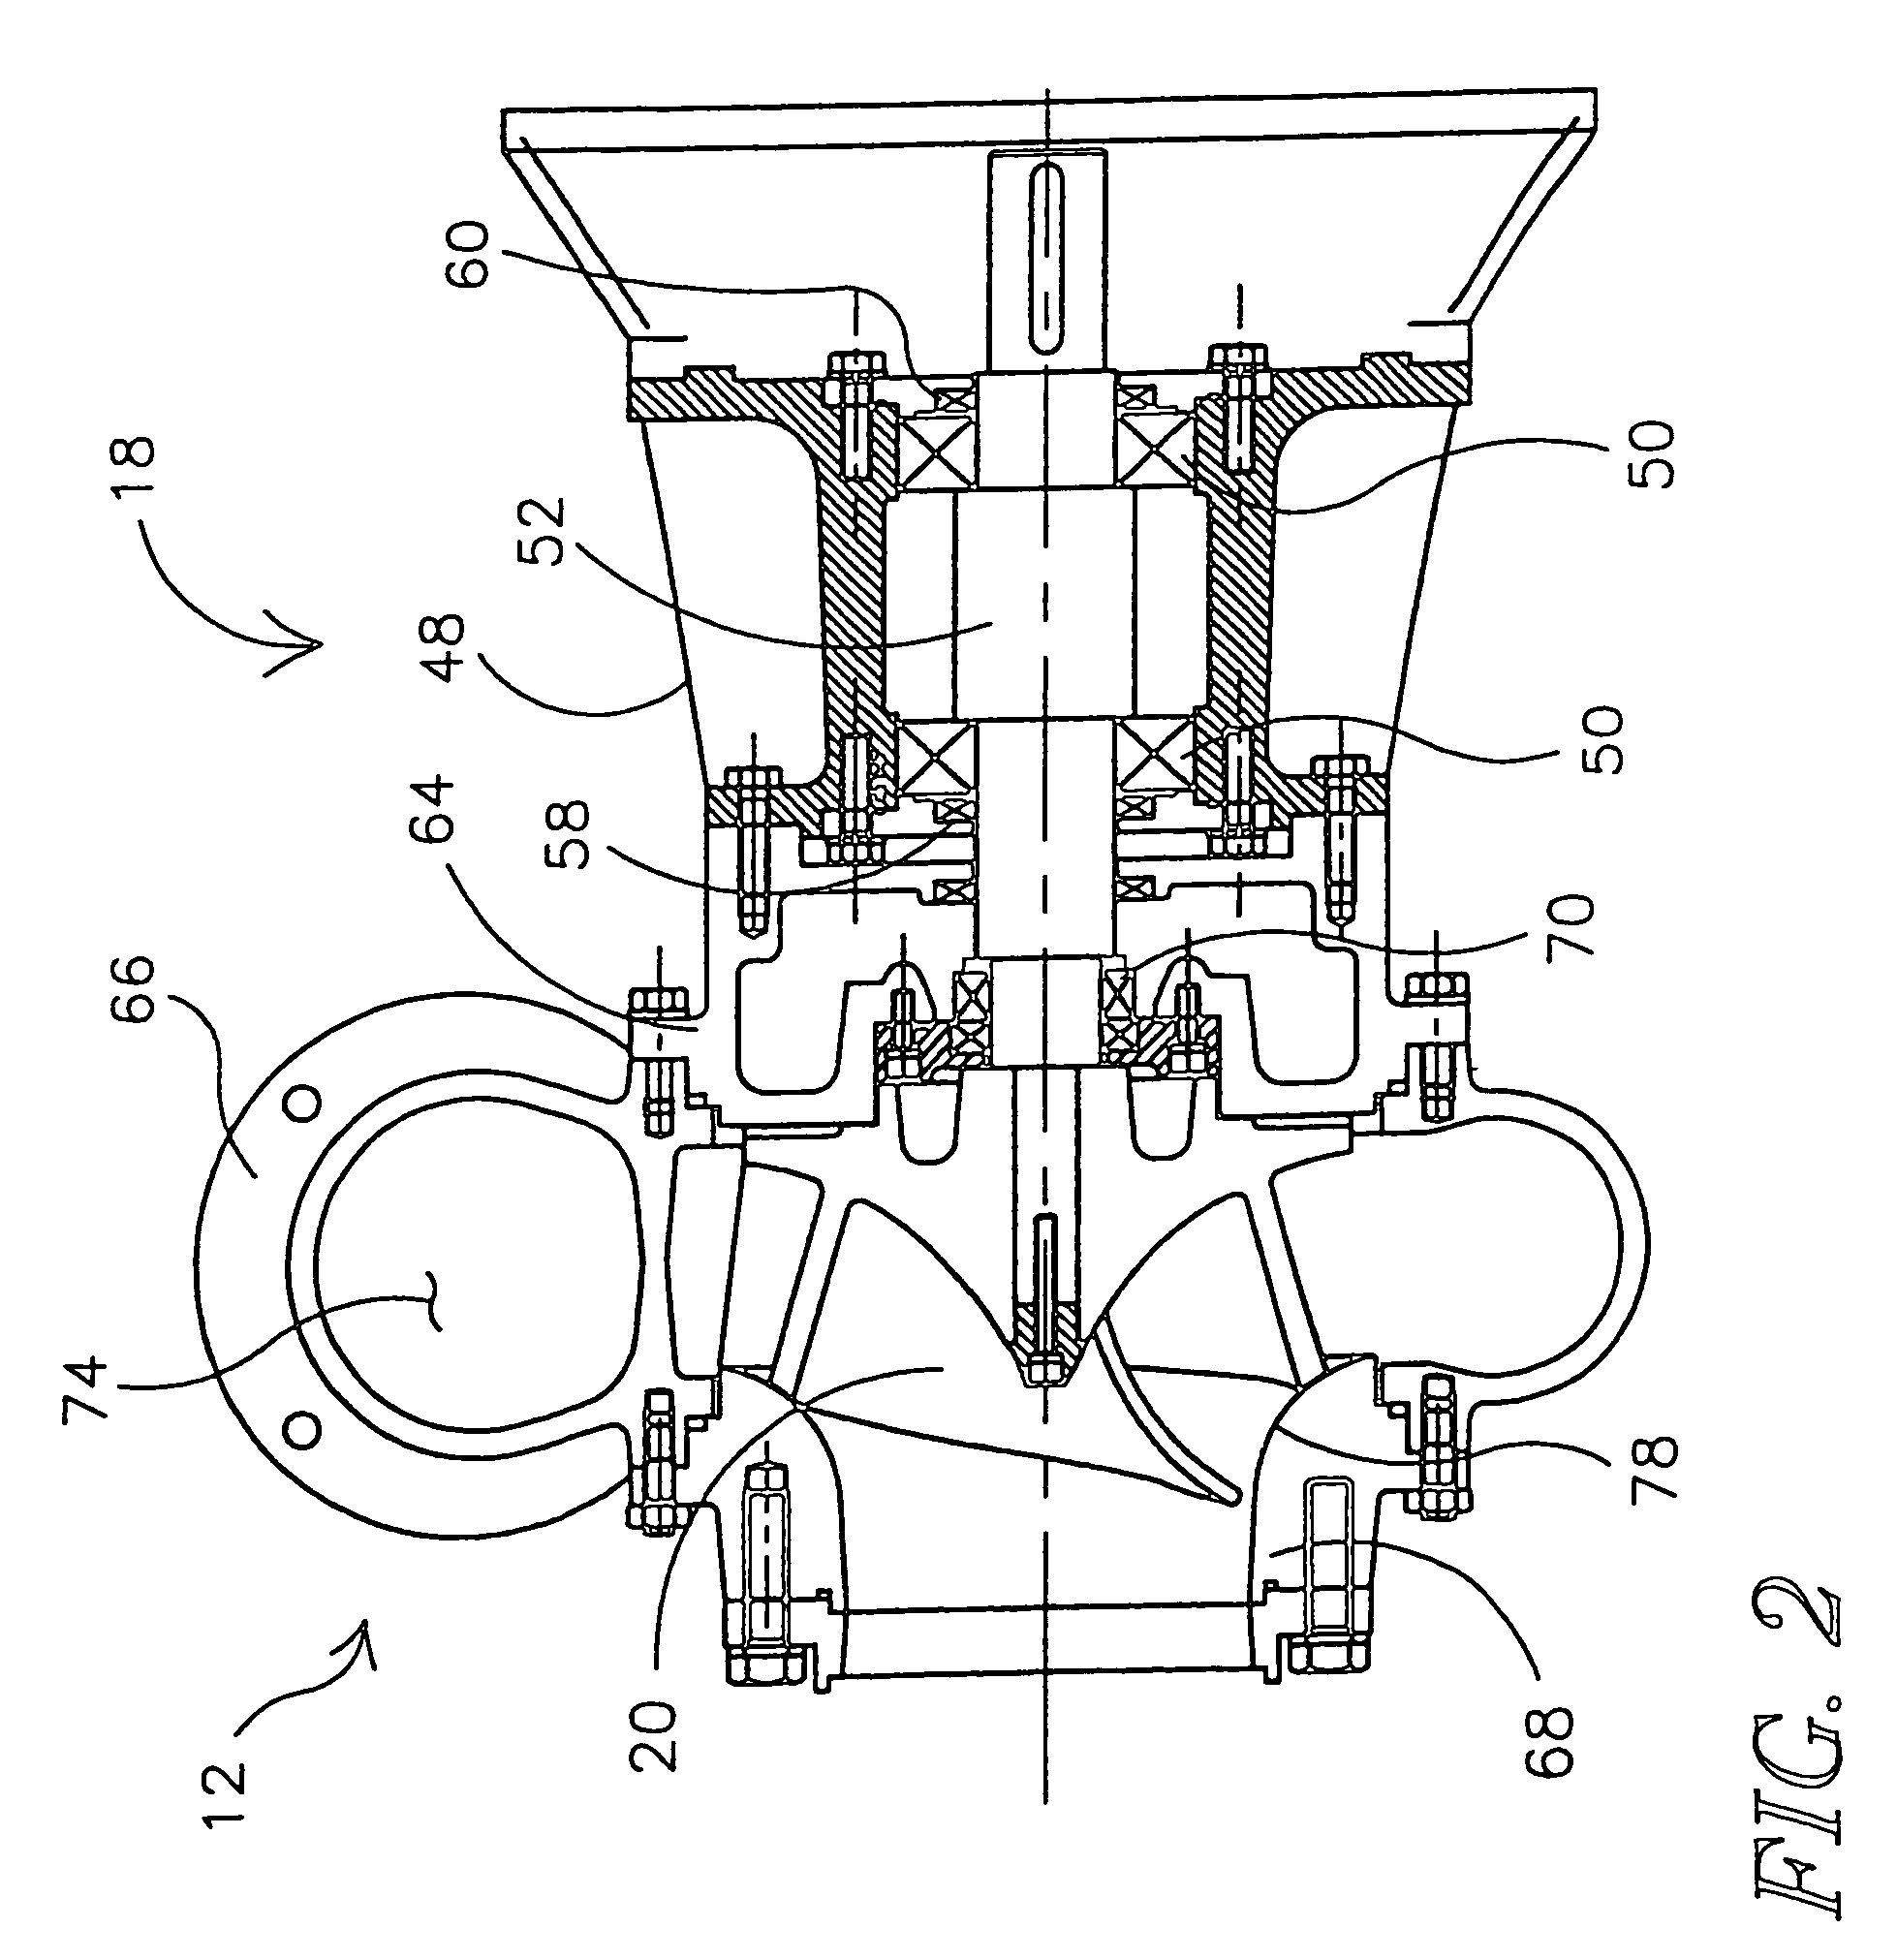 Pump system with vacuum source